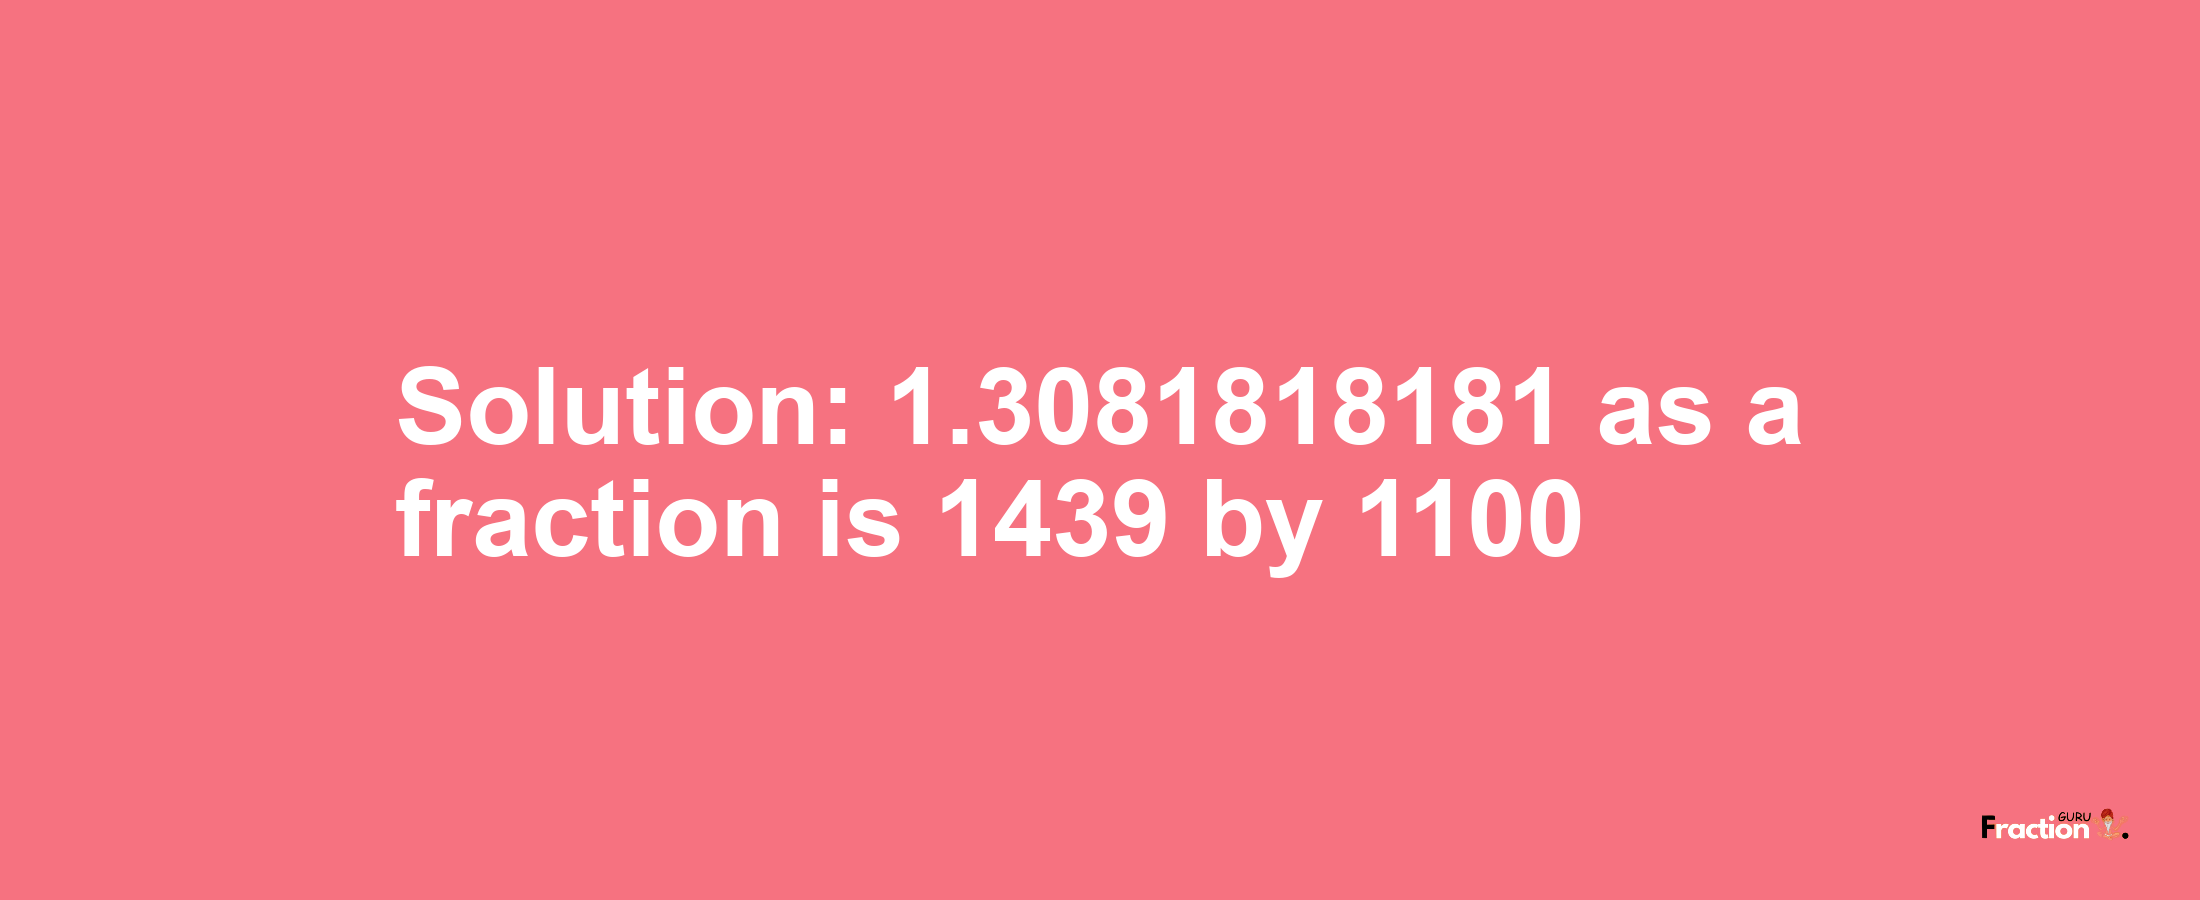 Solution:1.3081818181 as a fraction is 1439/1100